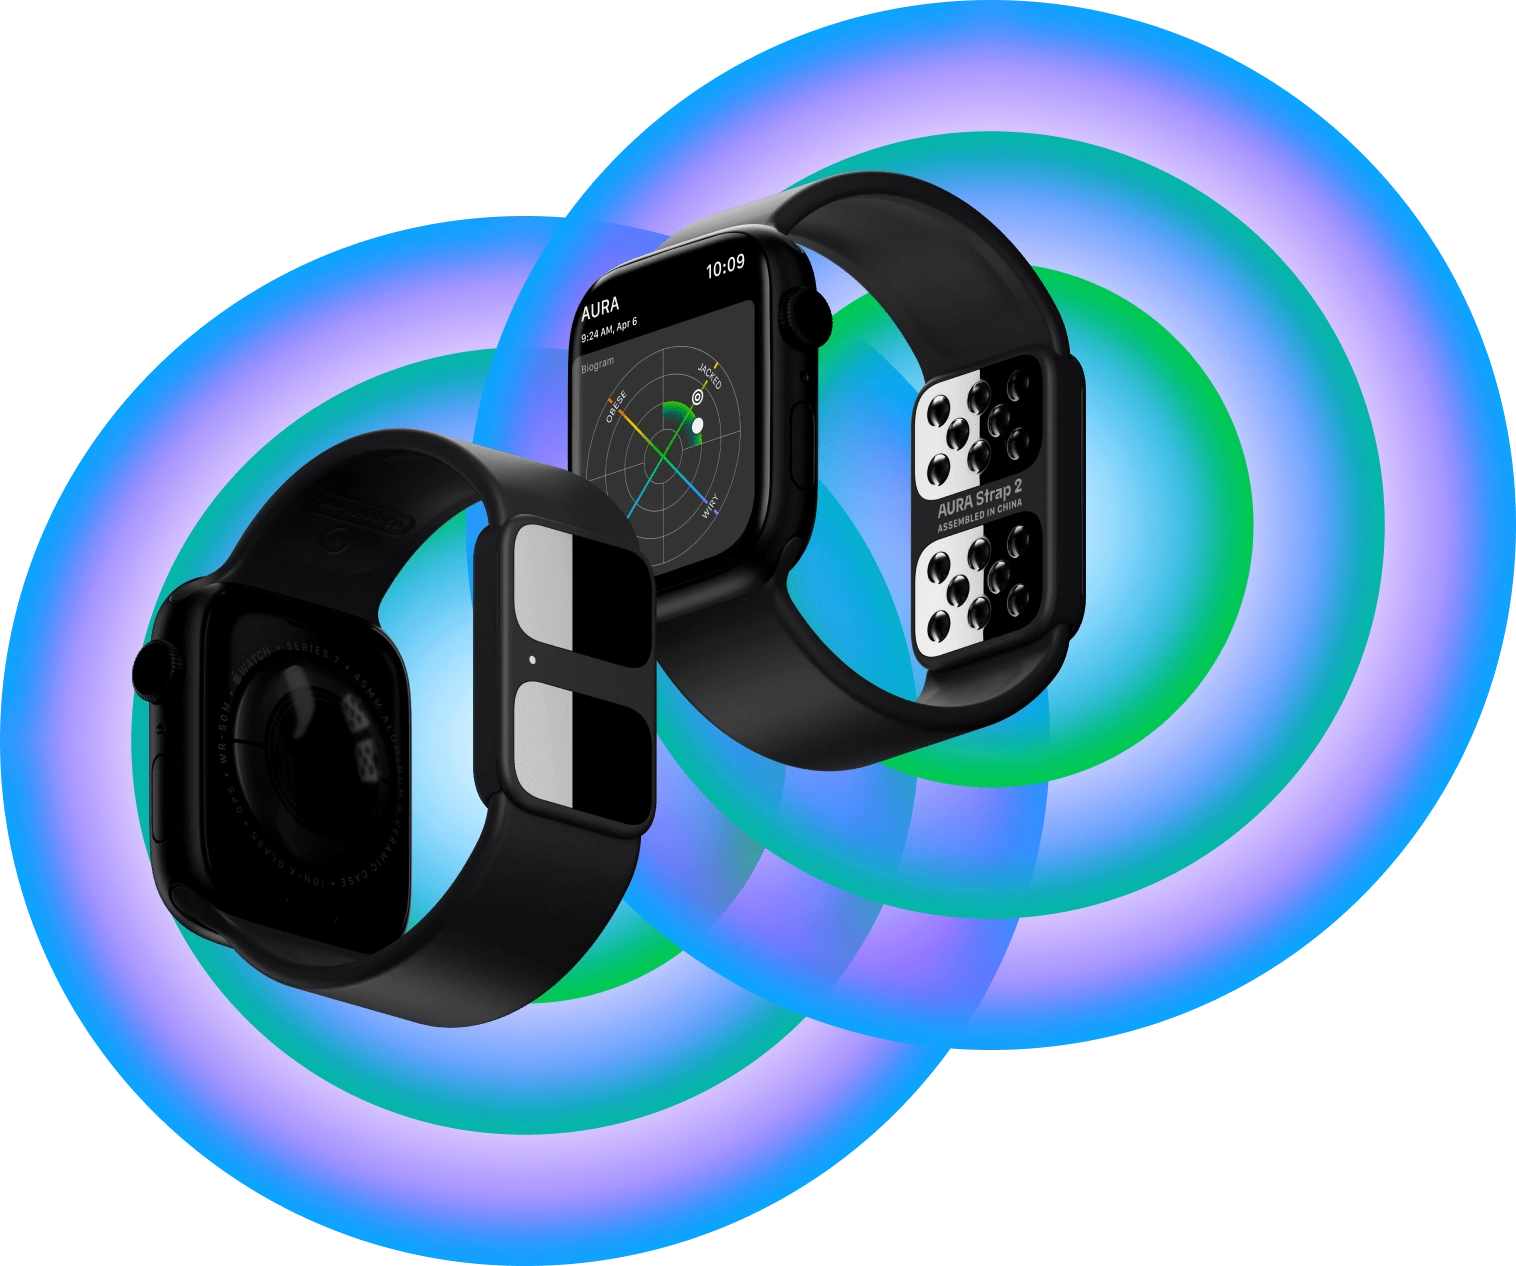 AURA Strap 2: Redefining Fitness Tracking for Apple Watch Users 